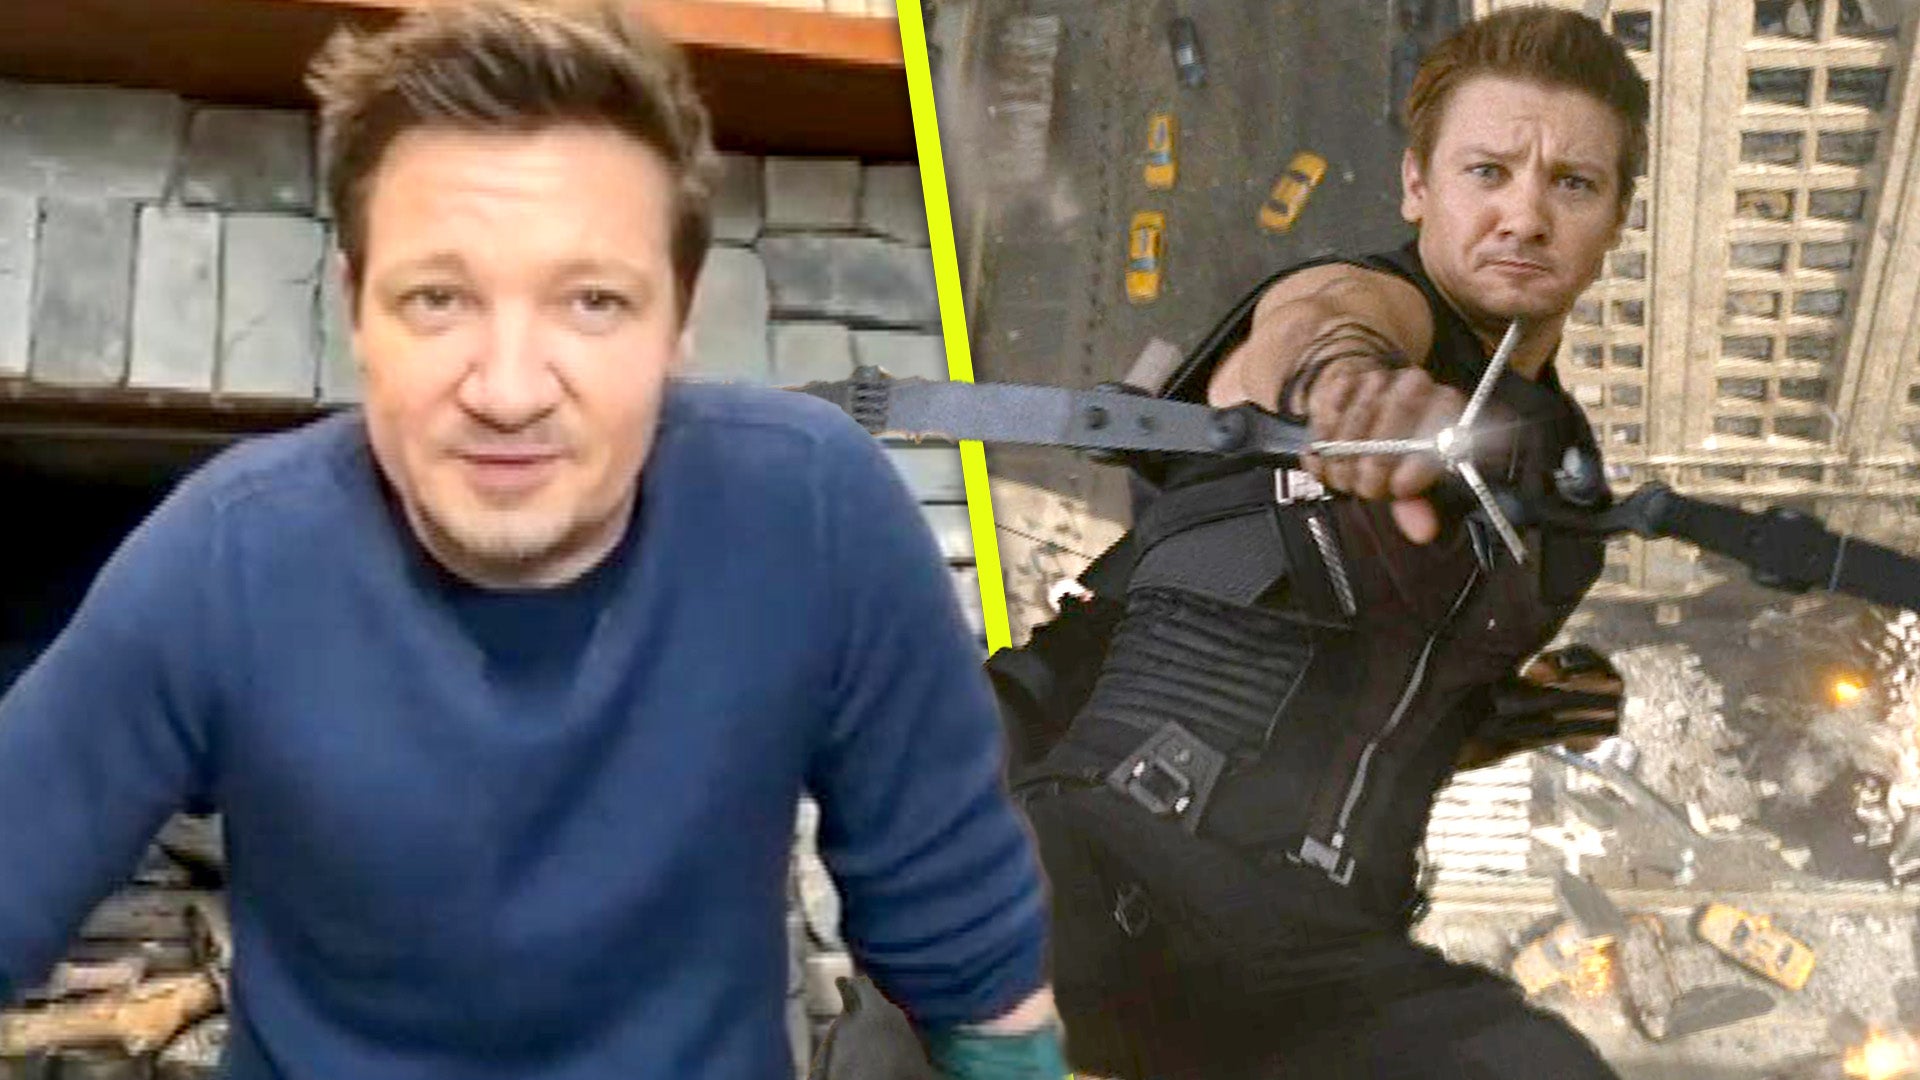 Jeremy Renner 'Ready' for Another 'Avengers' Movie 1 Year After Snowplow Accident (Exclusive)